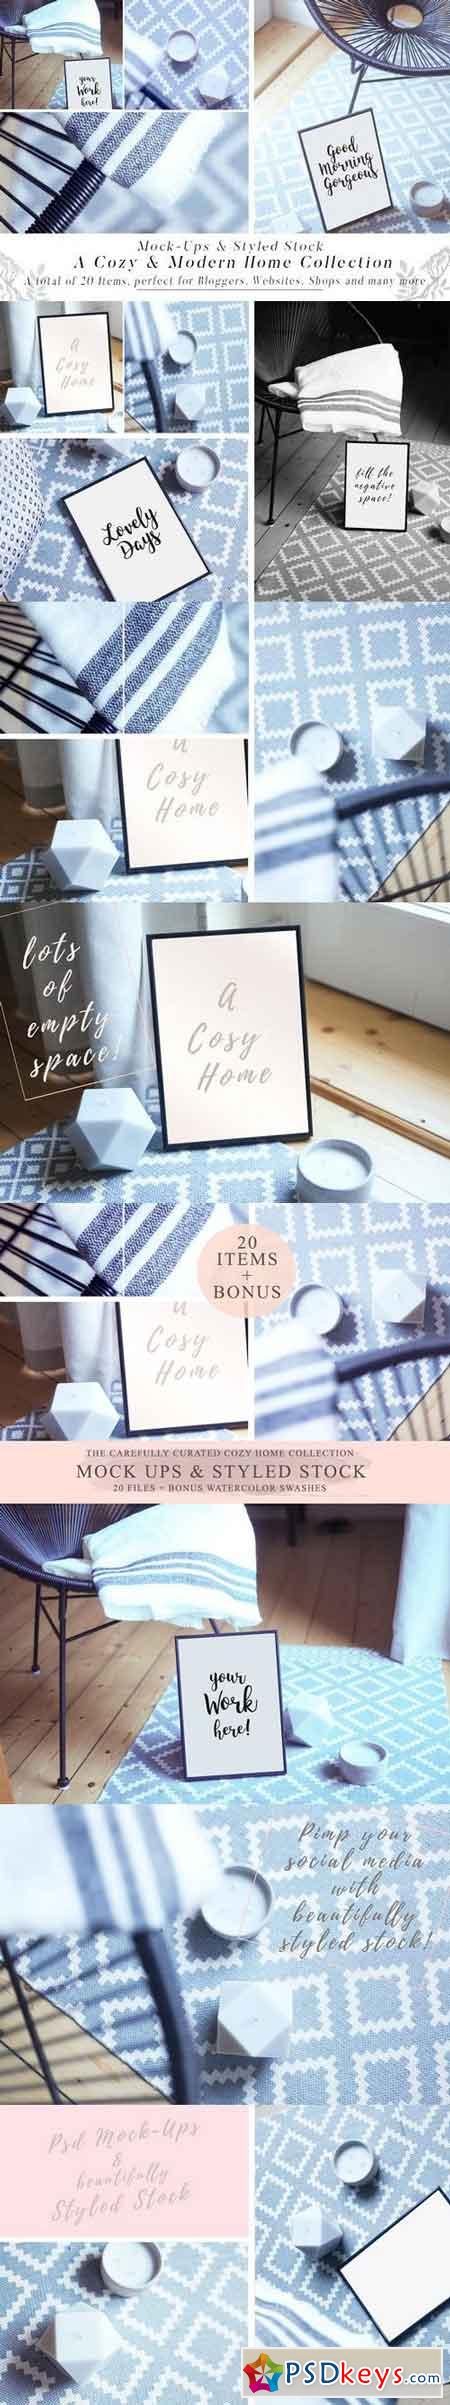 20 Cozy Home Mock Ups & Styled Stock 1155552